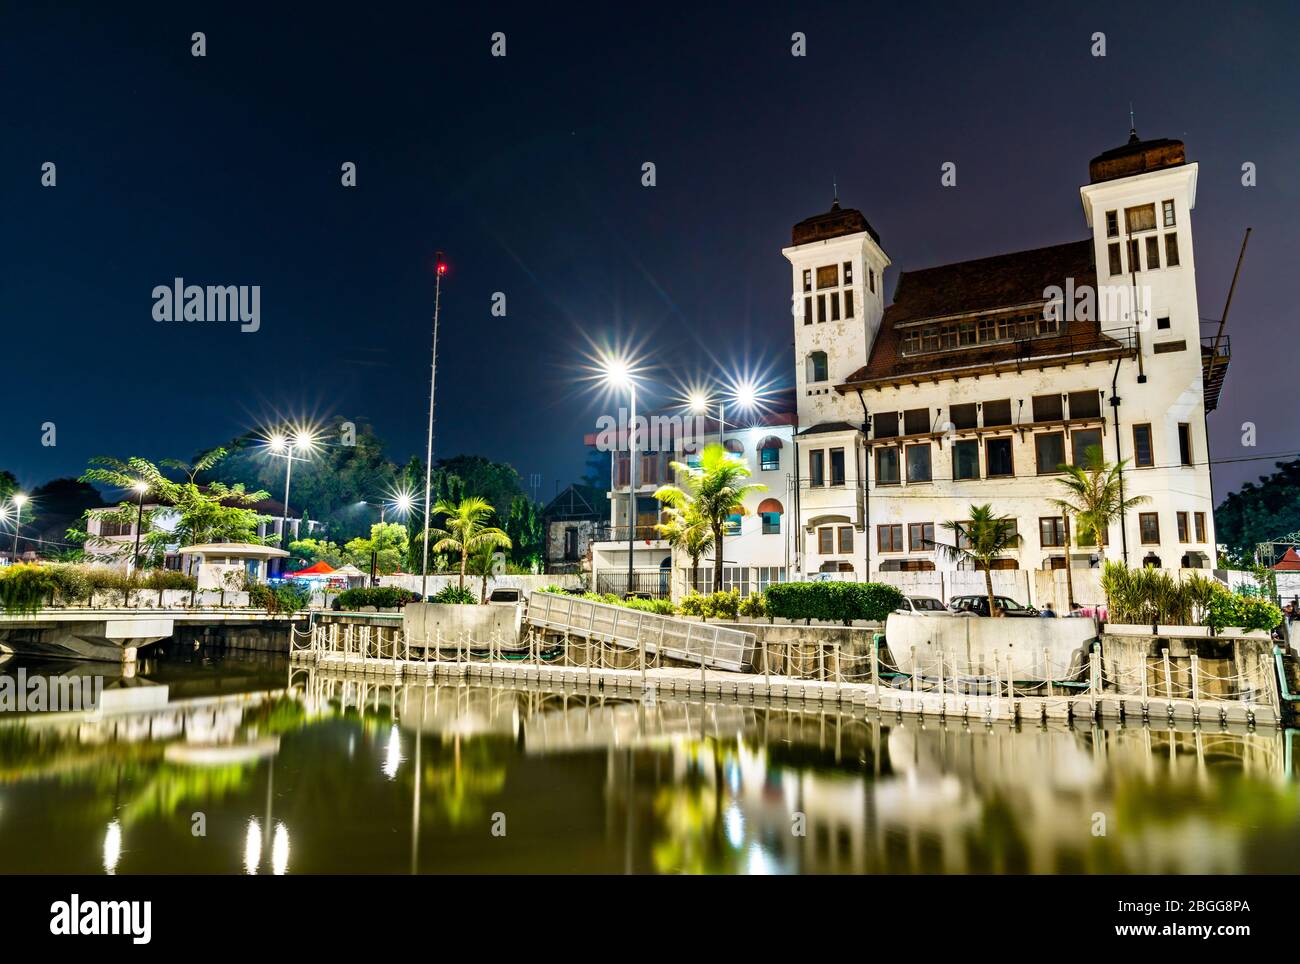 Traditional architecture in the old town of Jakarta, Indonesia Stock Photo